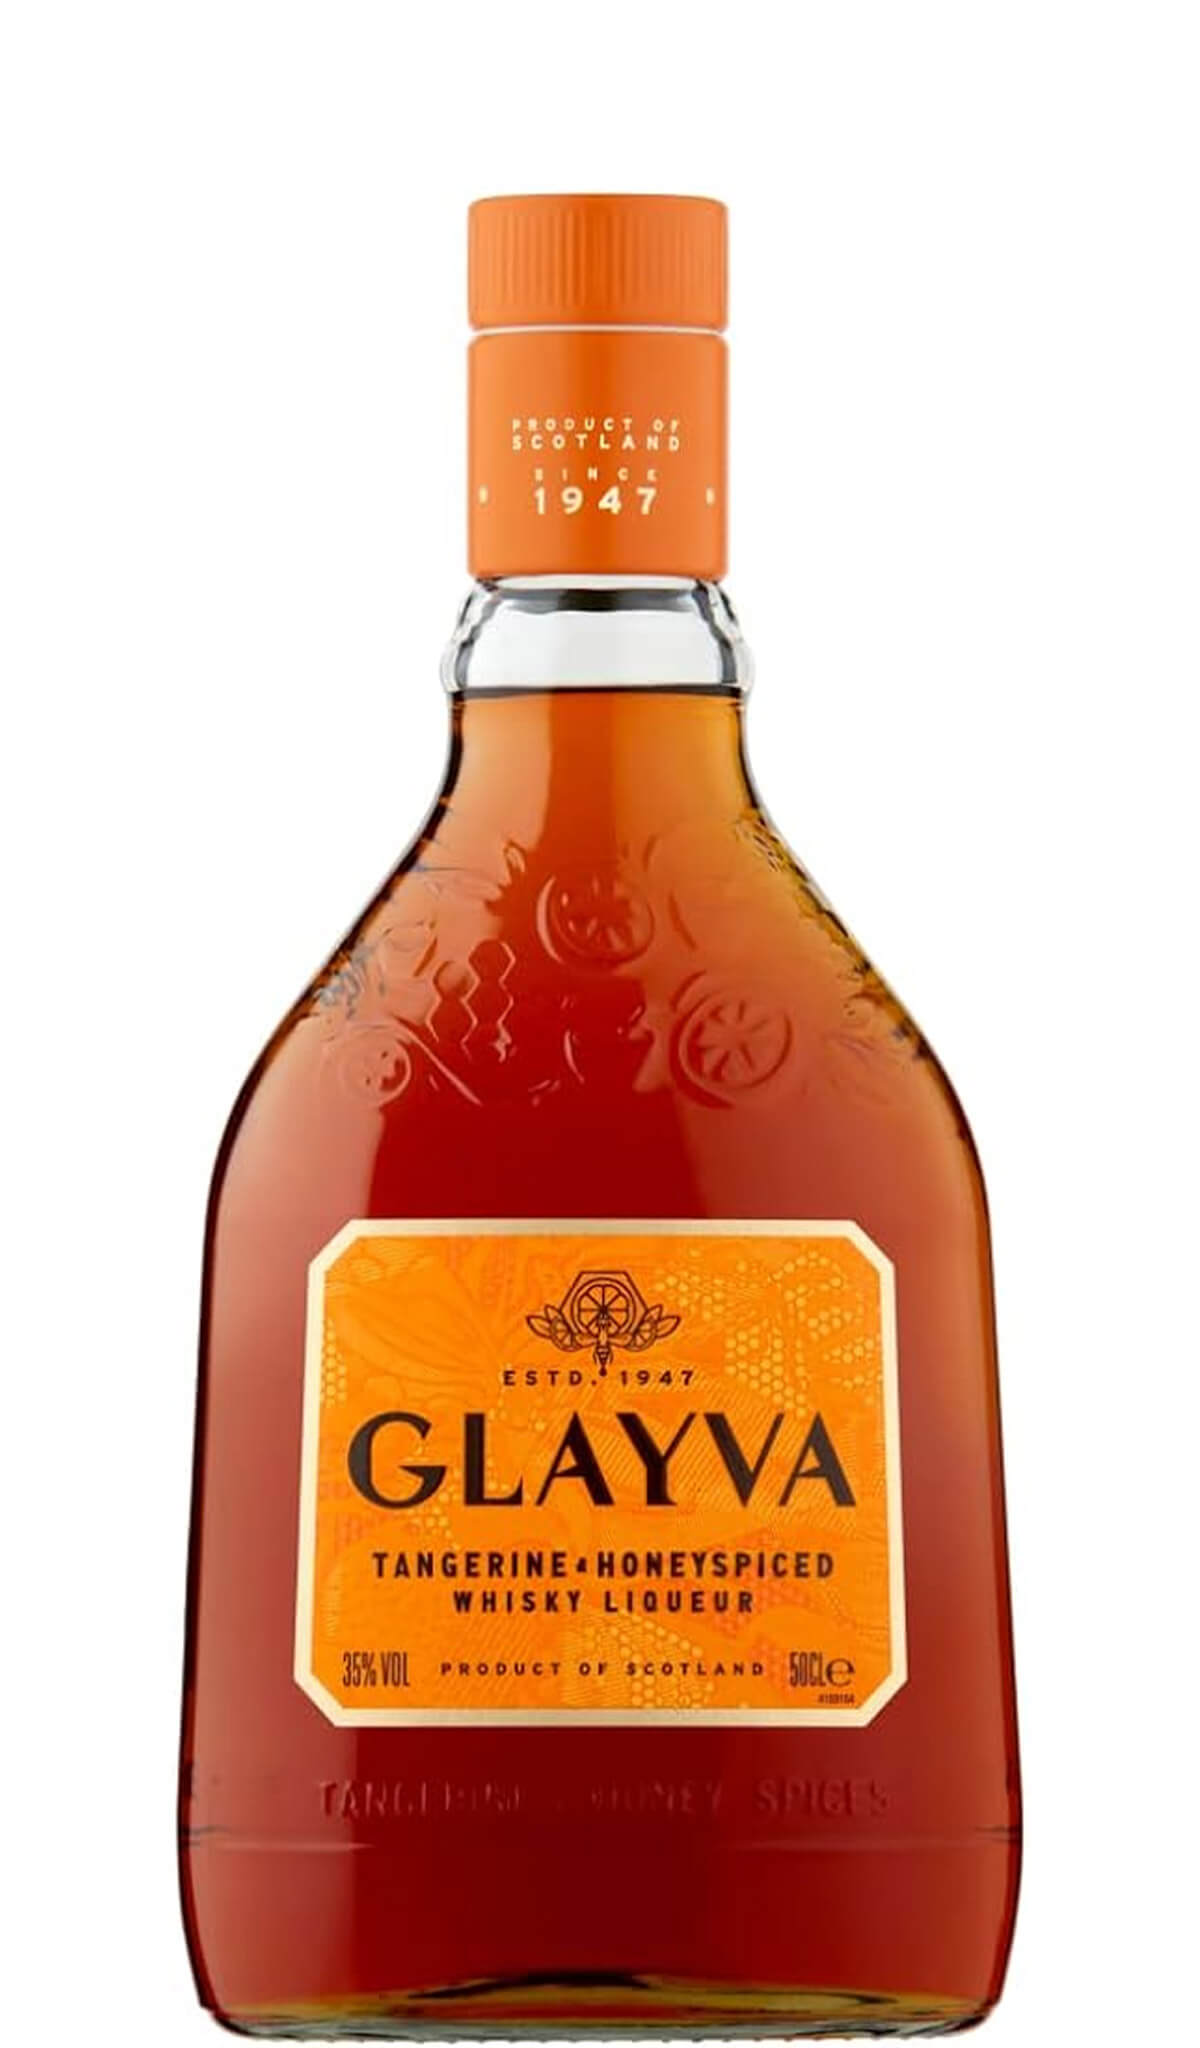 Find out more or buy Glayva Scotch Liqueur 500ml online at Wine Sellers Direct - Australia’s independent liquor specialists.